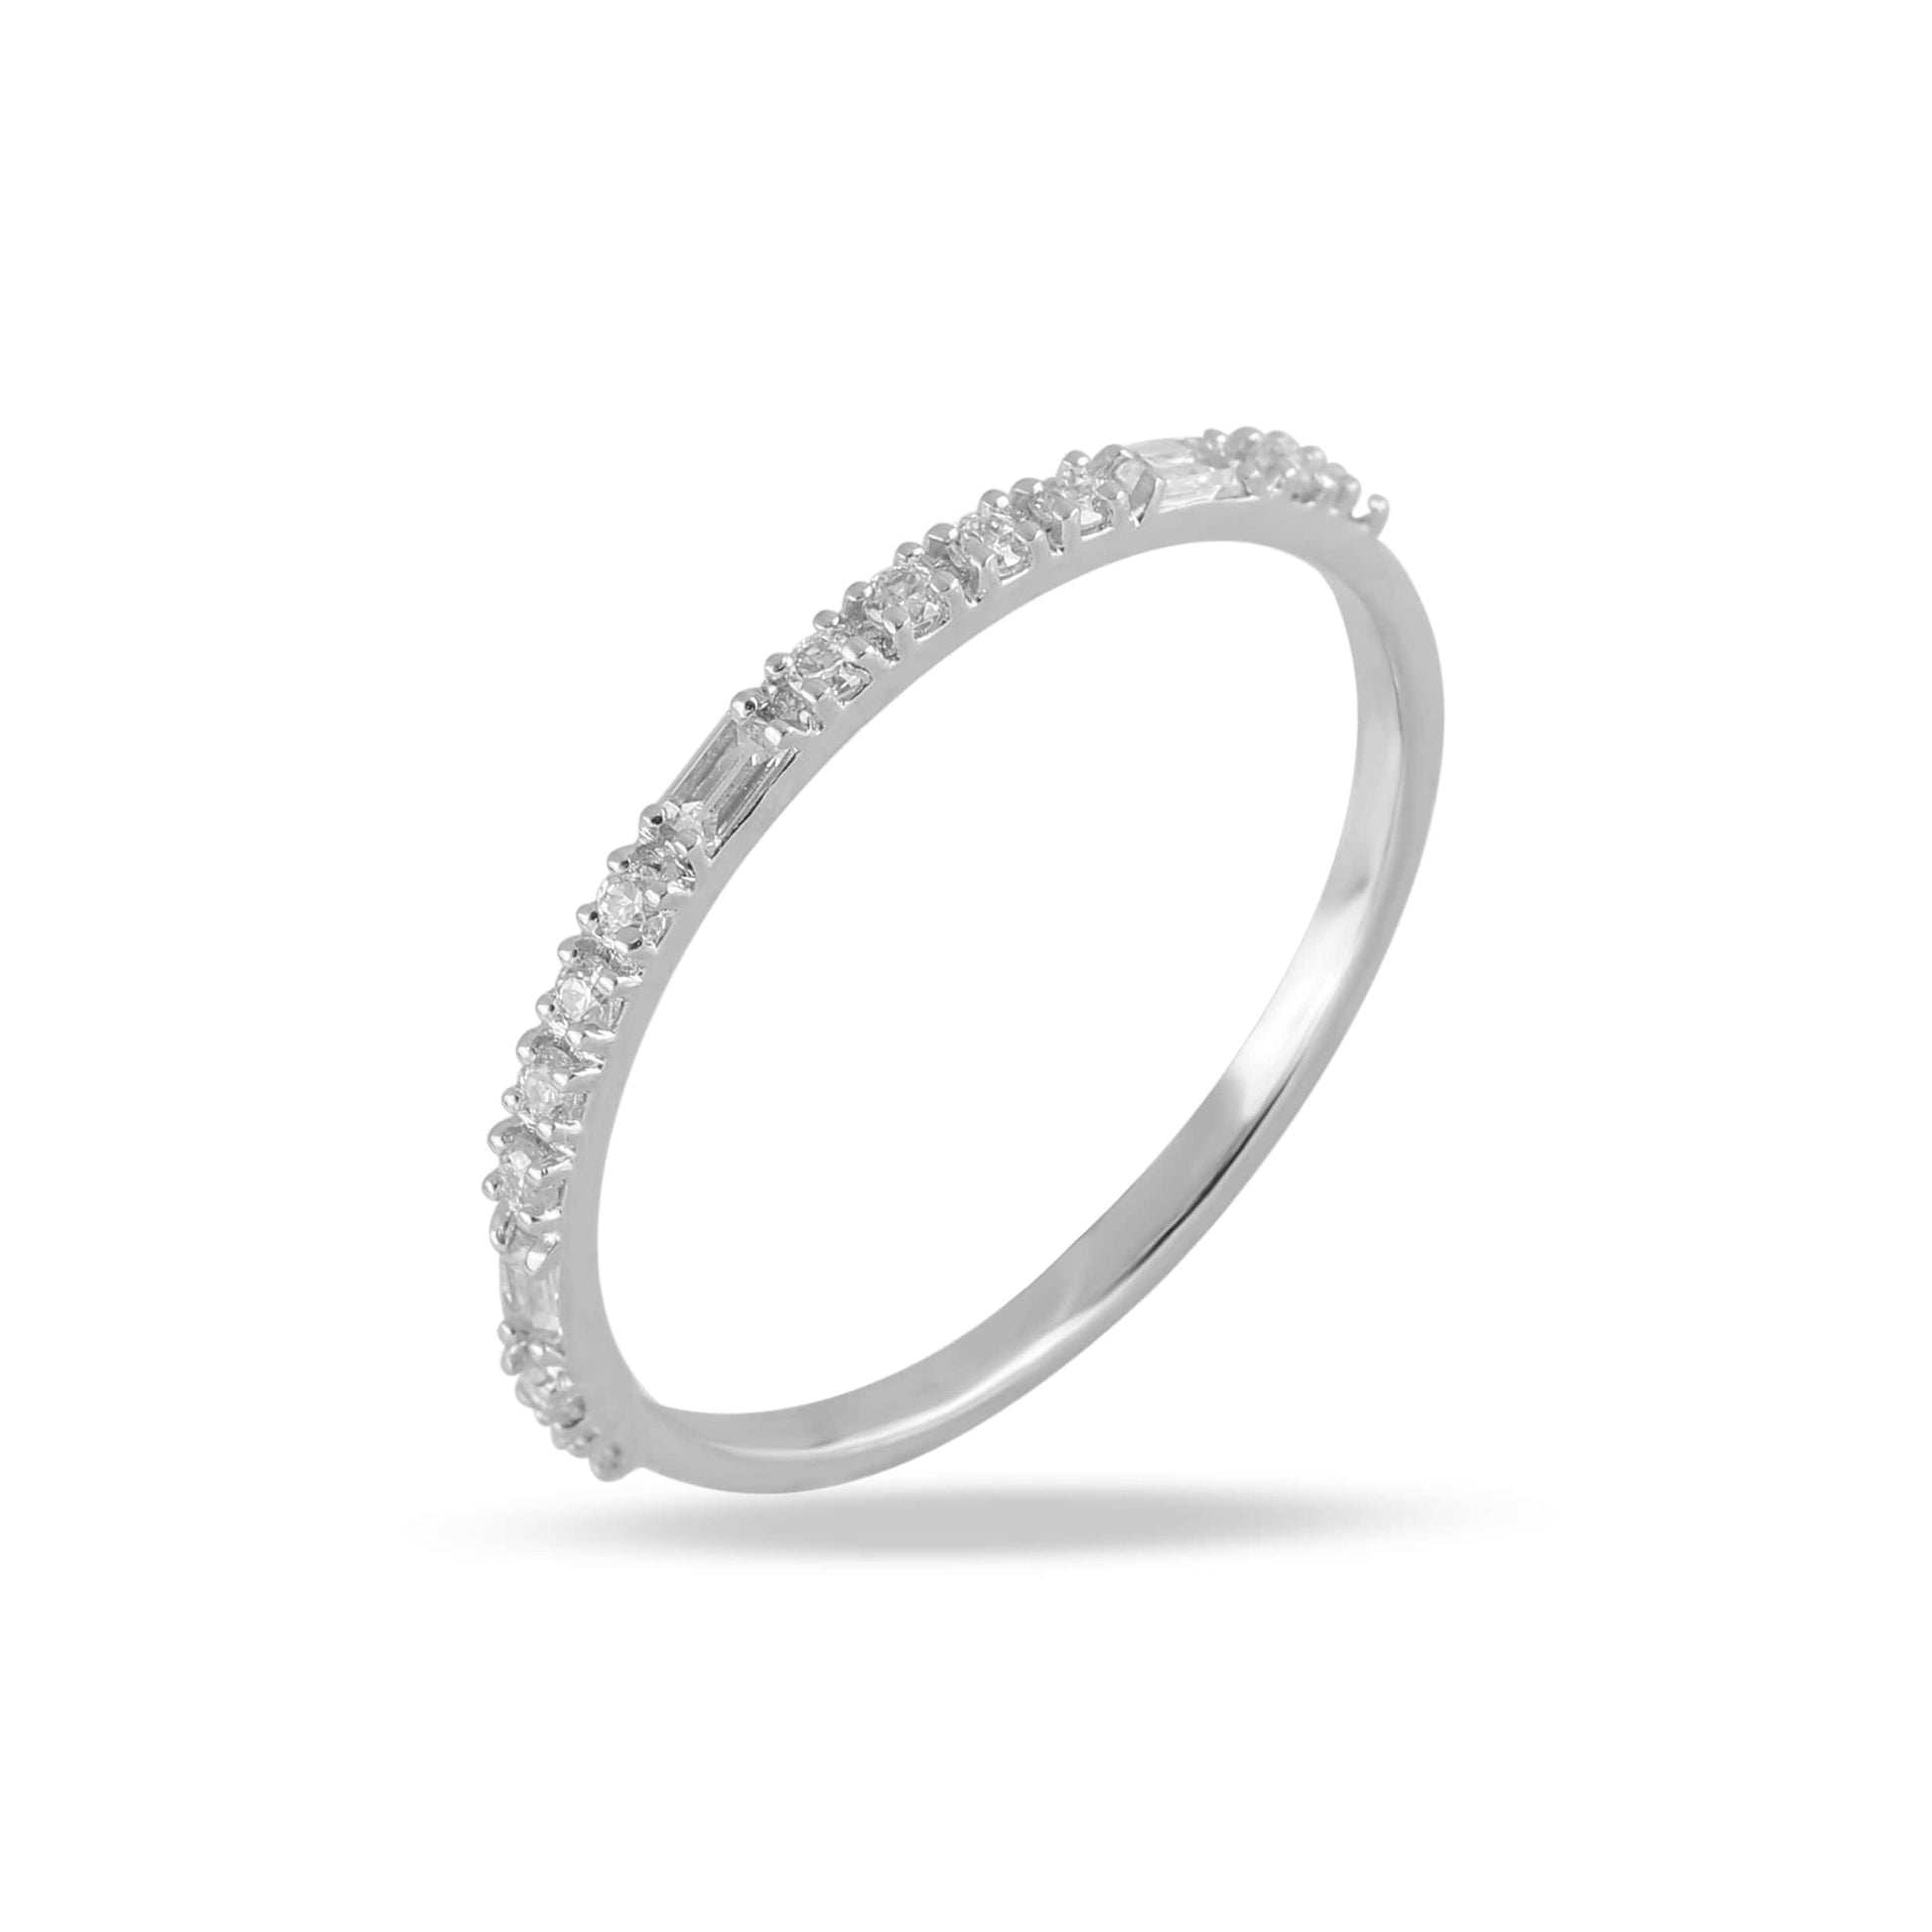 Glowing Solid 14kt White Gold Diamond Ring For Woman